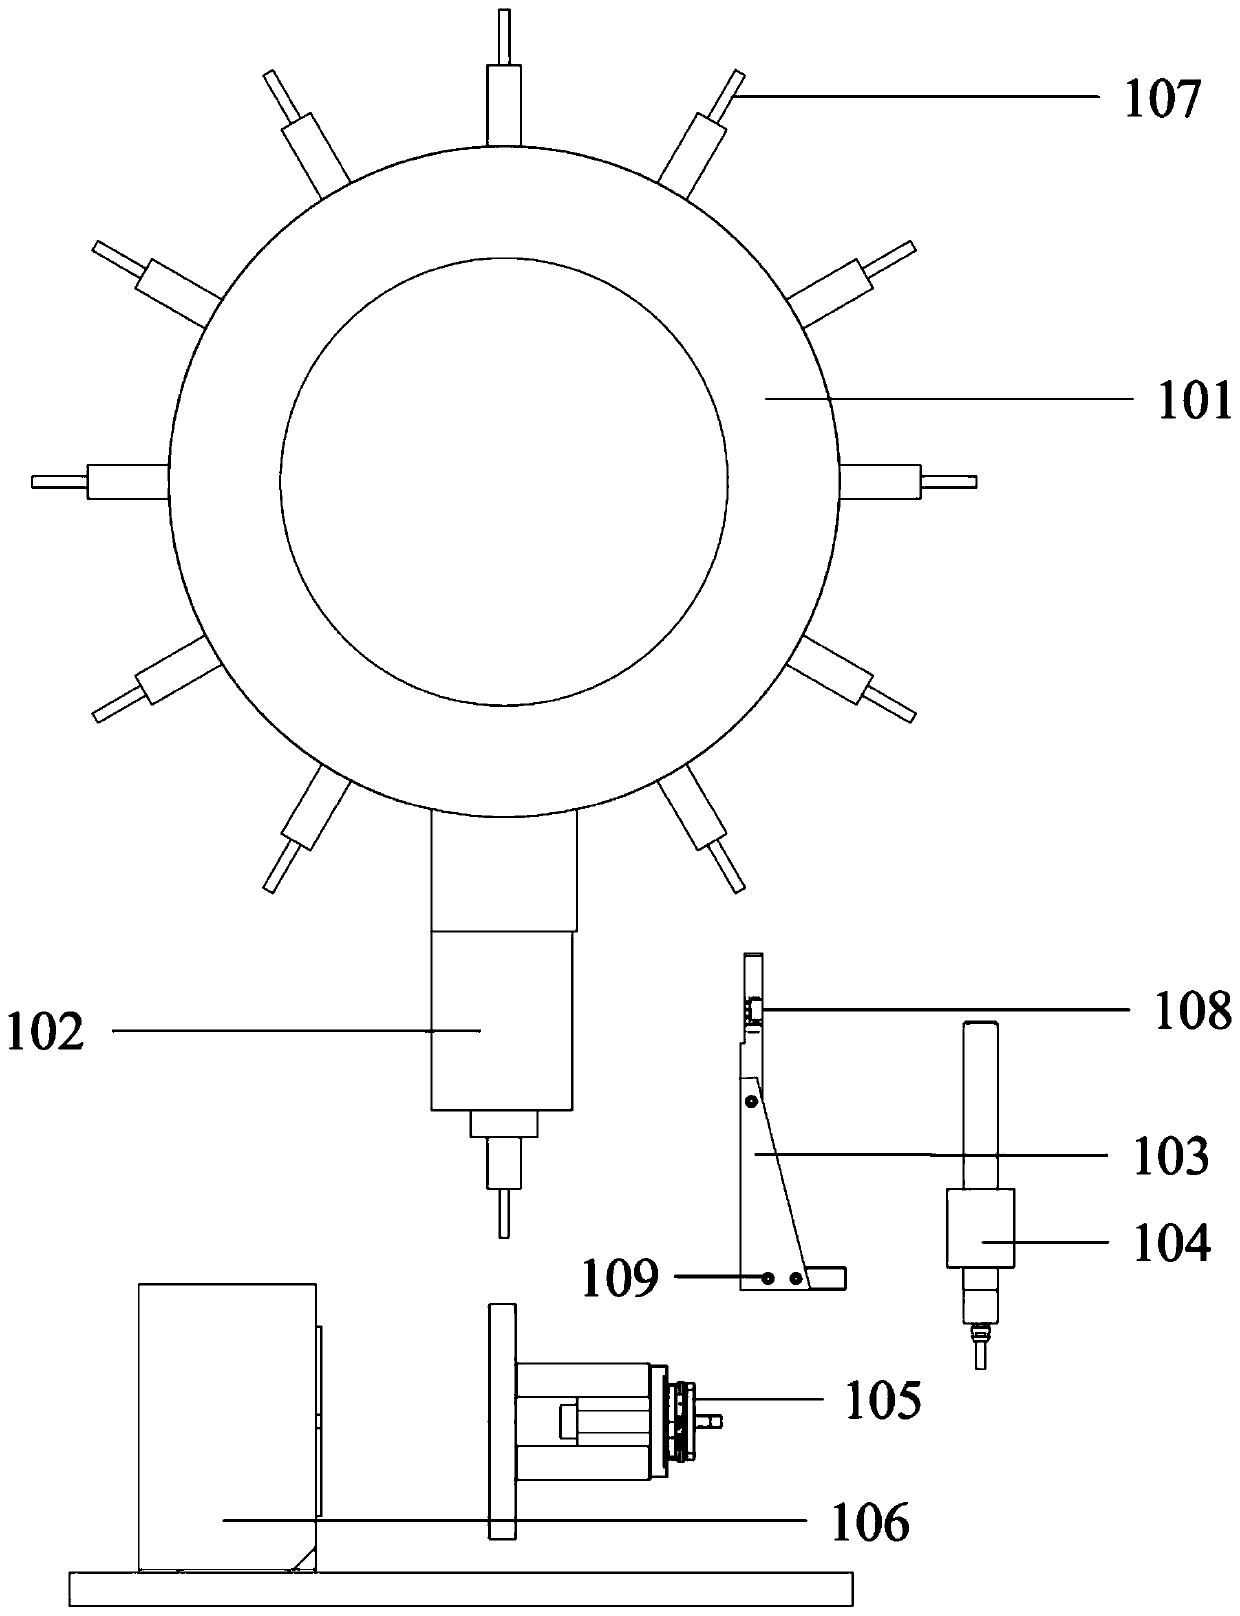 Common metal CNC machine additionally provided with high-speed spindle and application method thereof